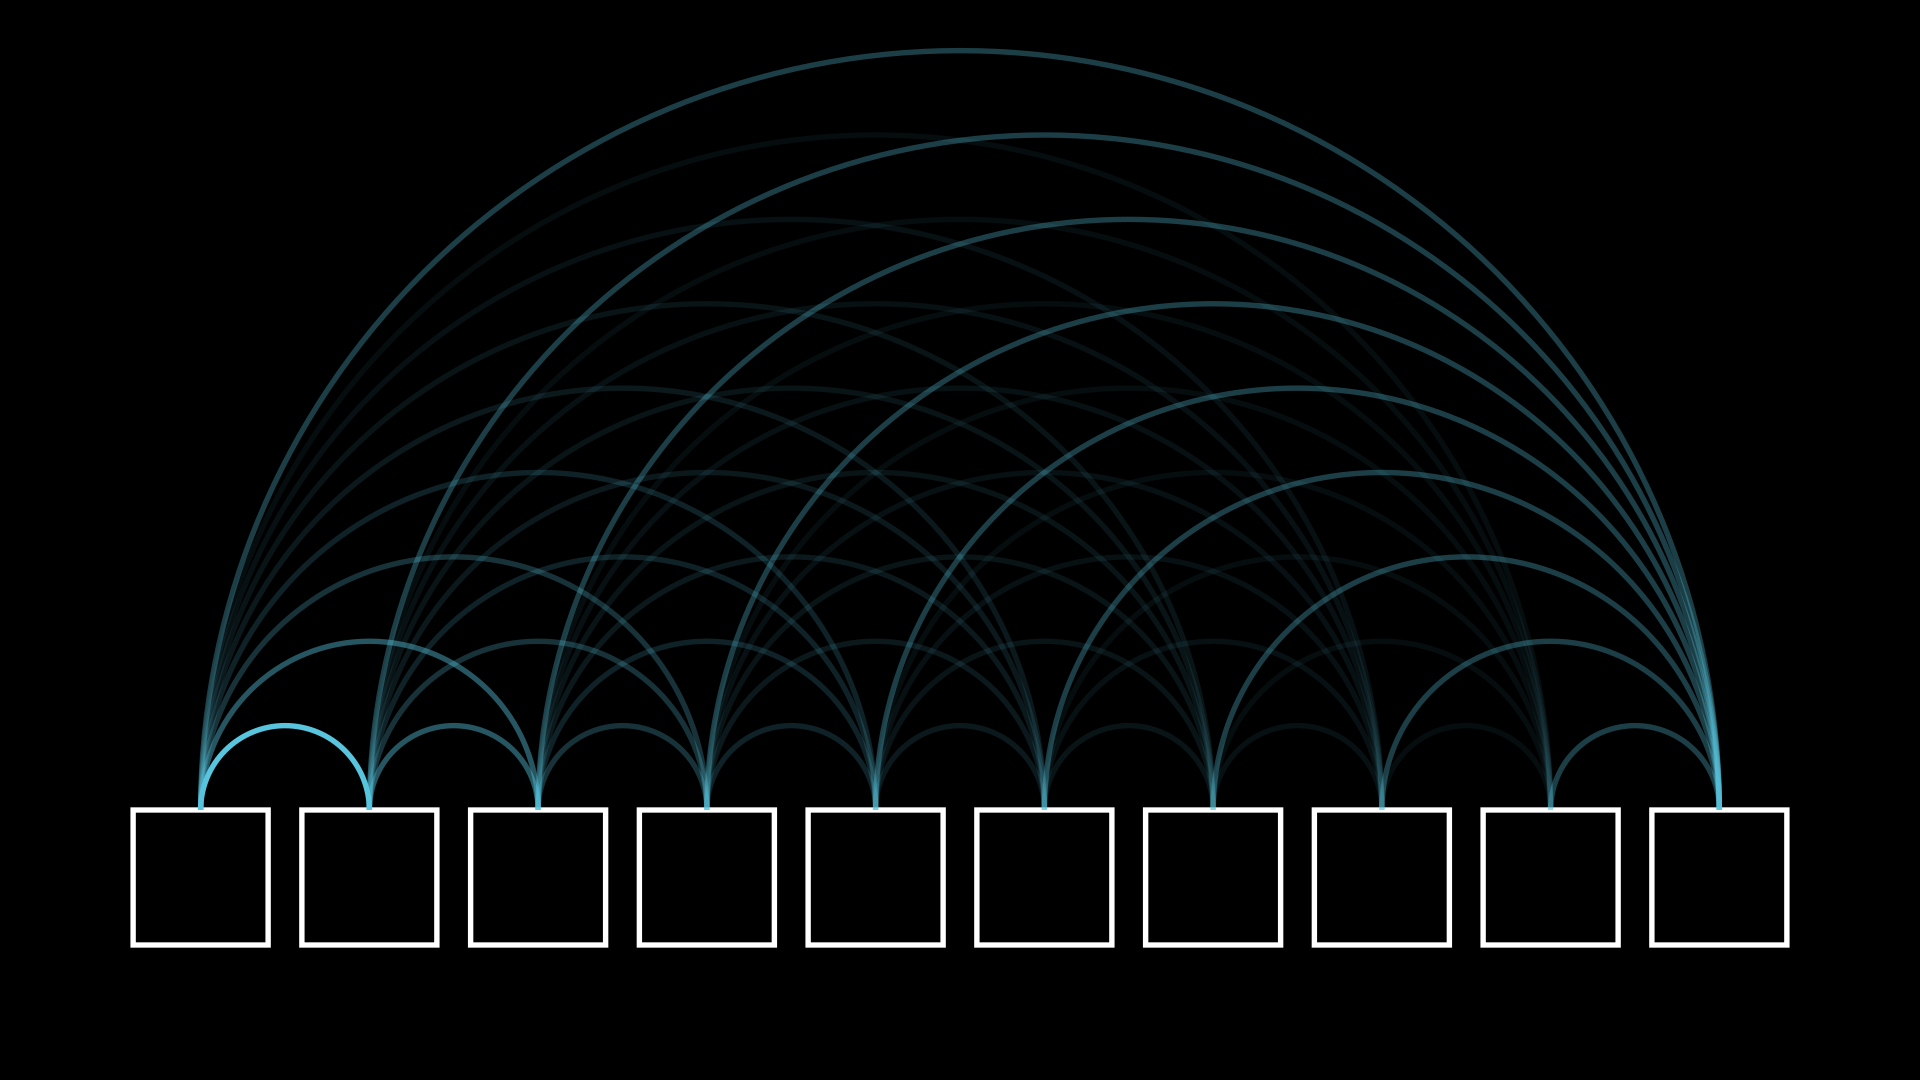 A visualization of every possible path for n=10, with opacity corresponding to frequency.